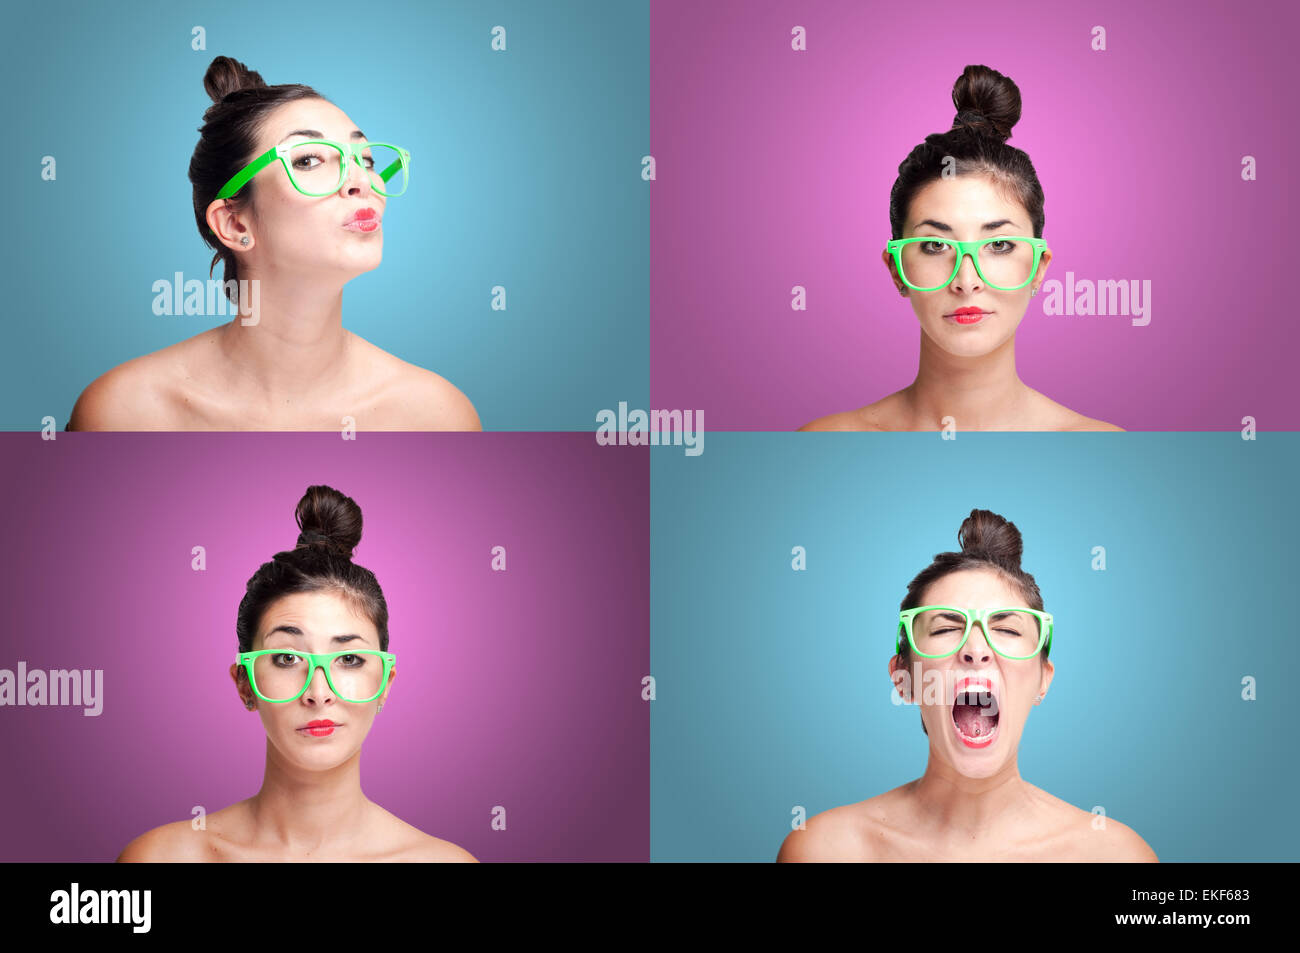 set of girl with different expressions isolated Stock Photo